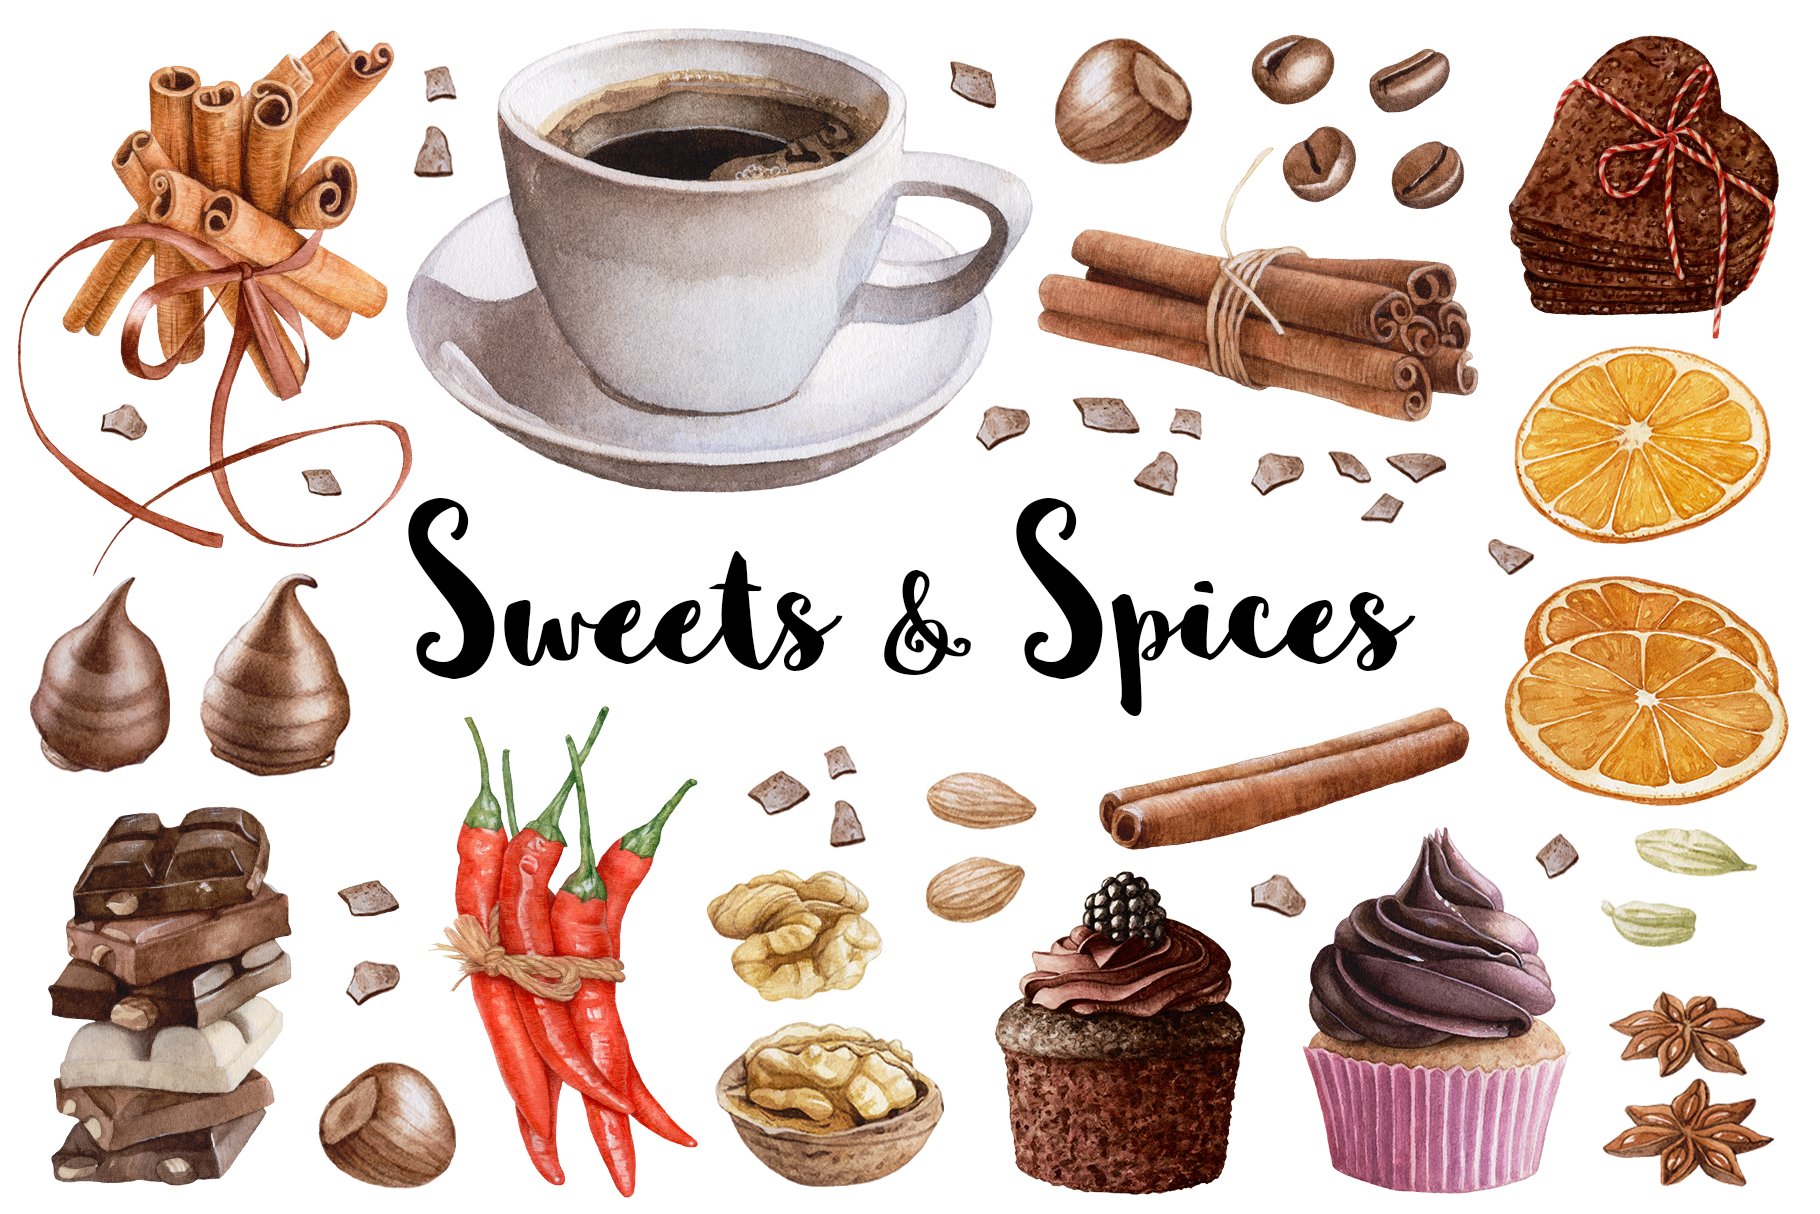 So delicious spices and sweets collection.